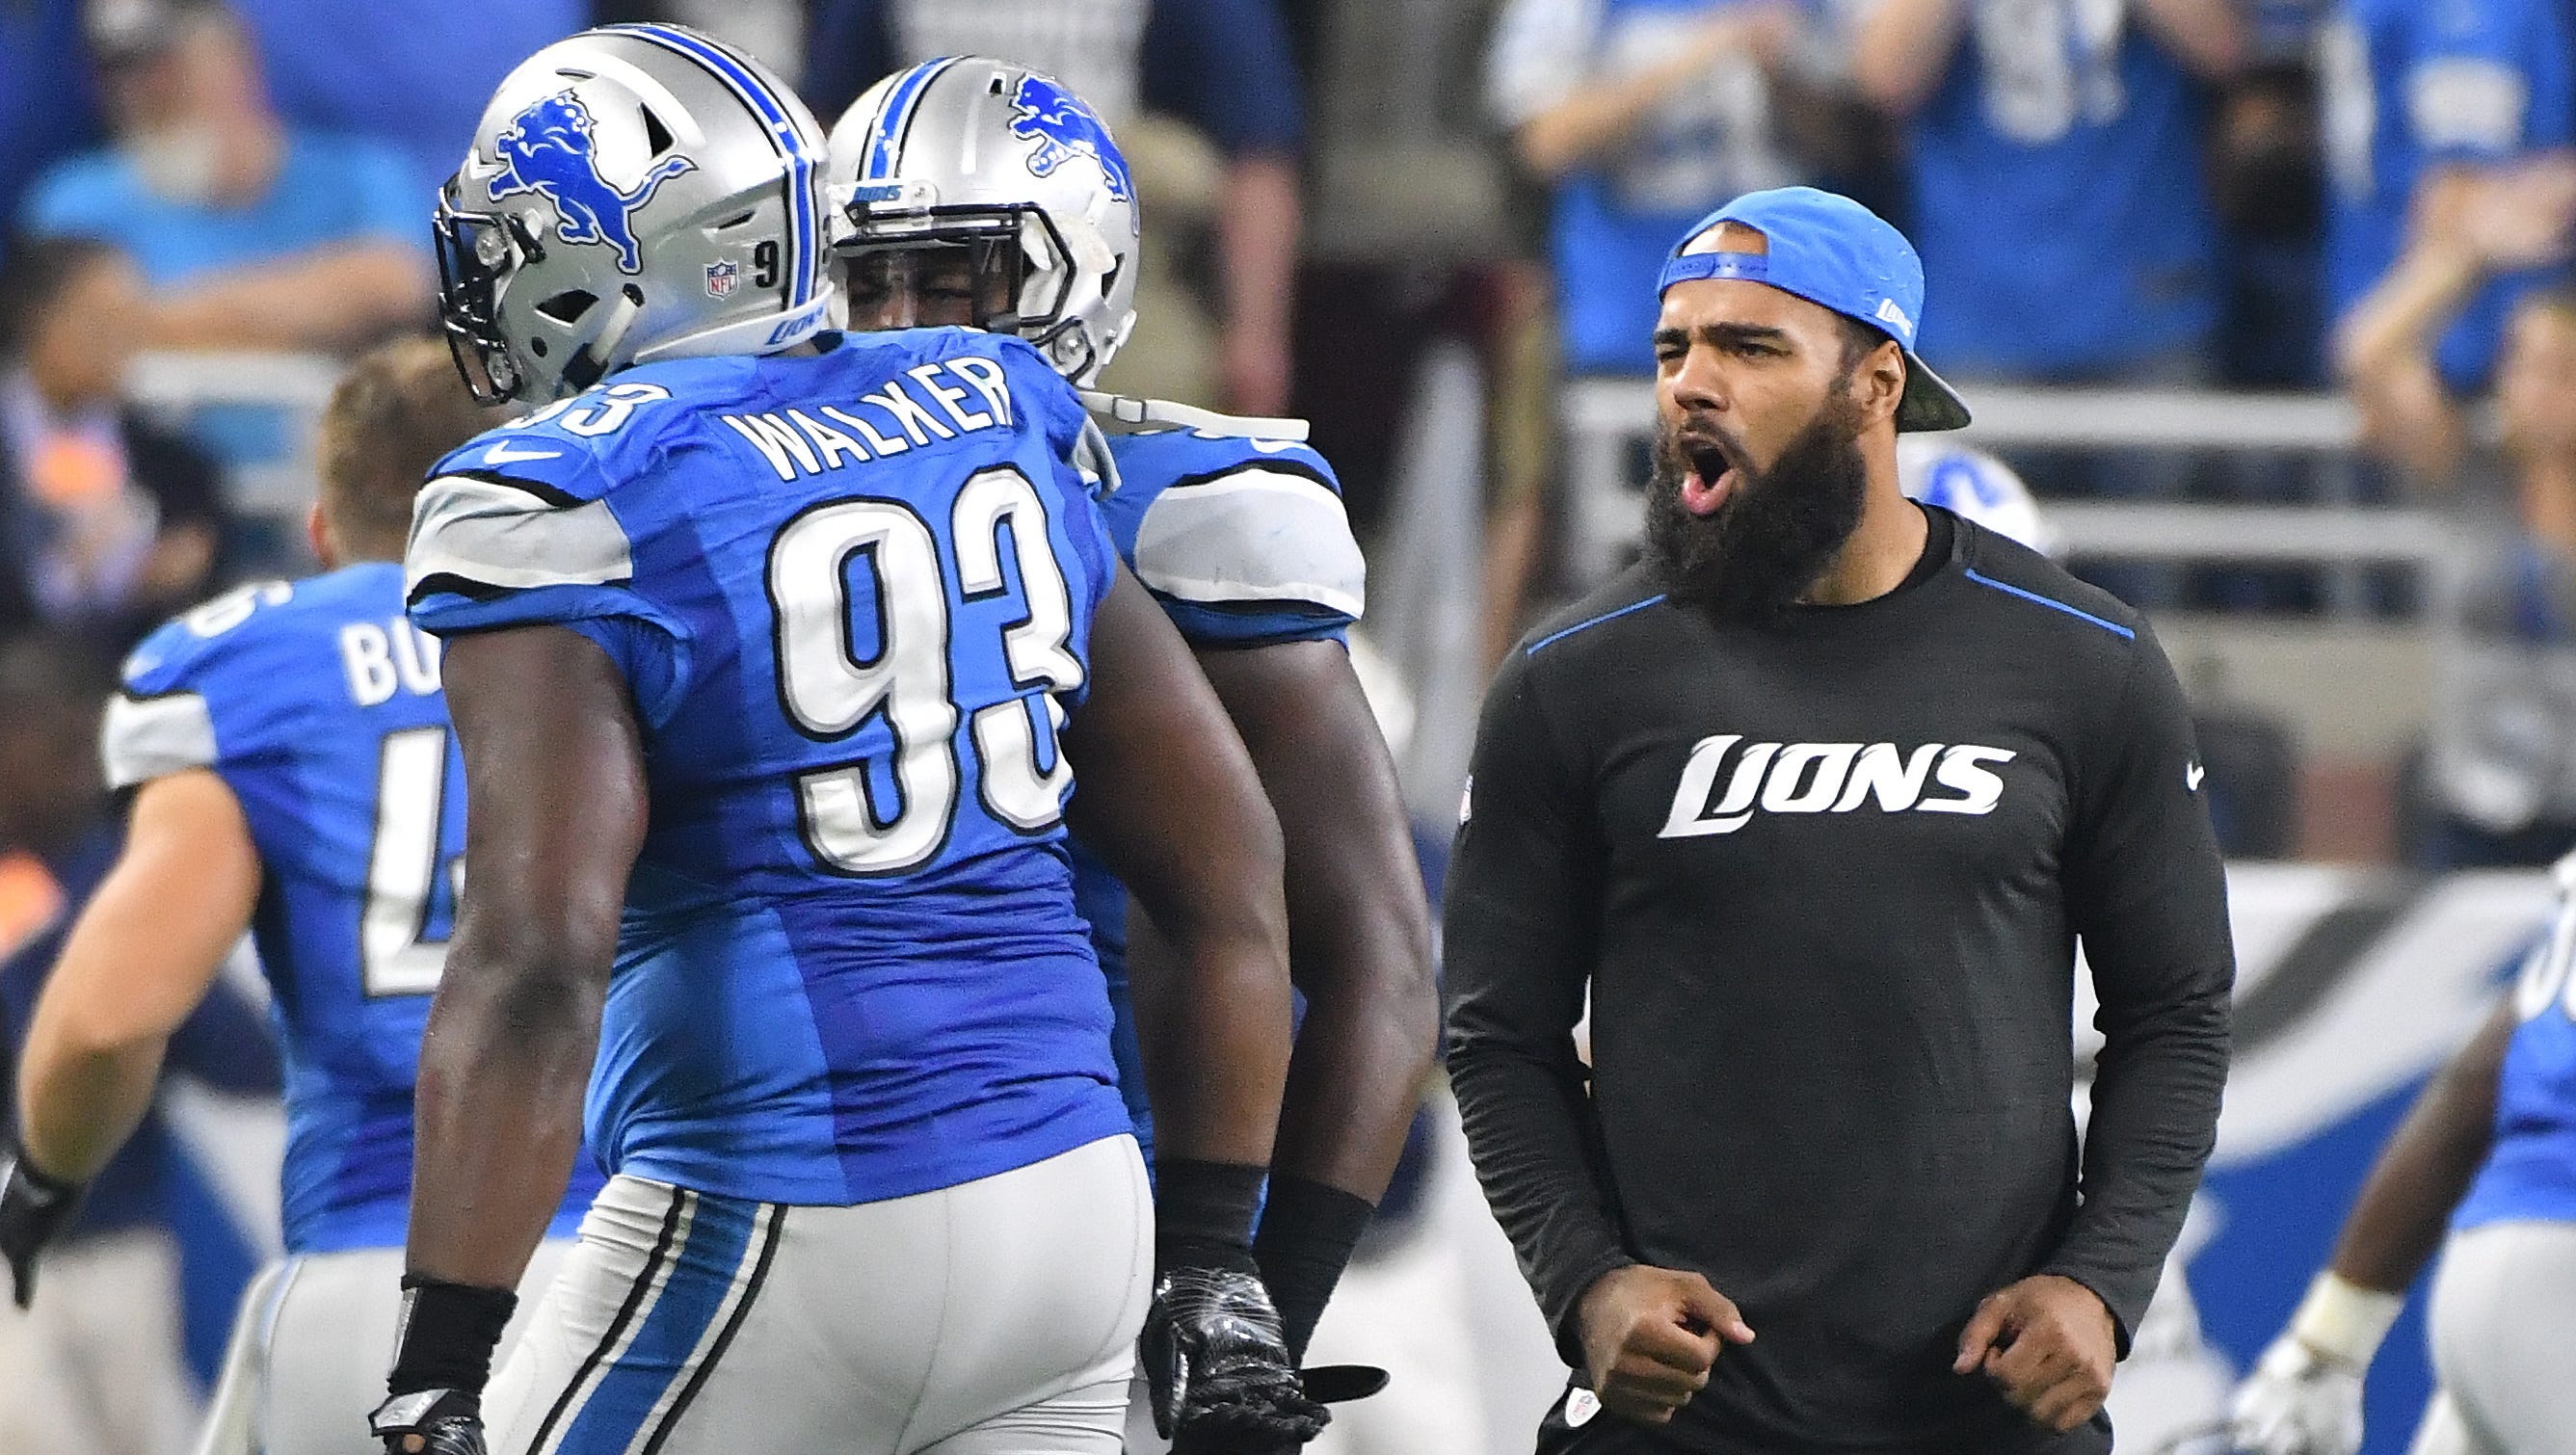 Injured linebacker DeAndre Levy cheers on teammate Tyrunn Walker after Detroit defense stopped the Rams on 4th and 1 at the end of the first half.